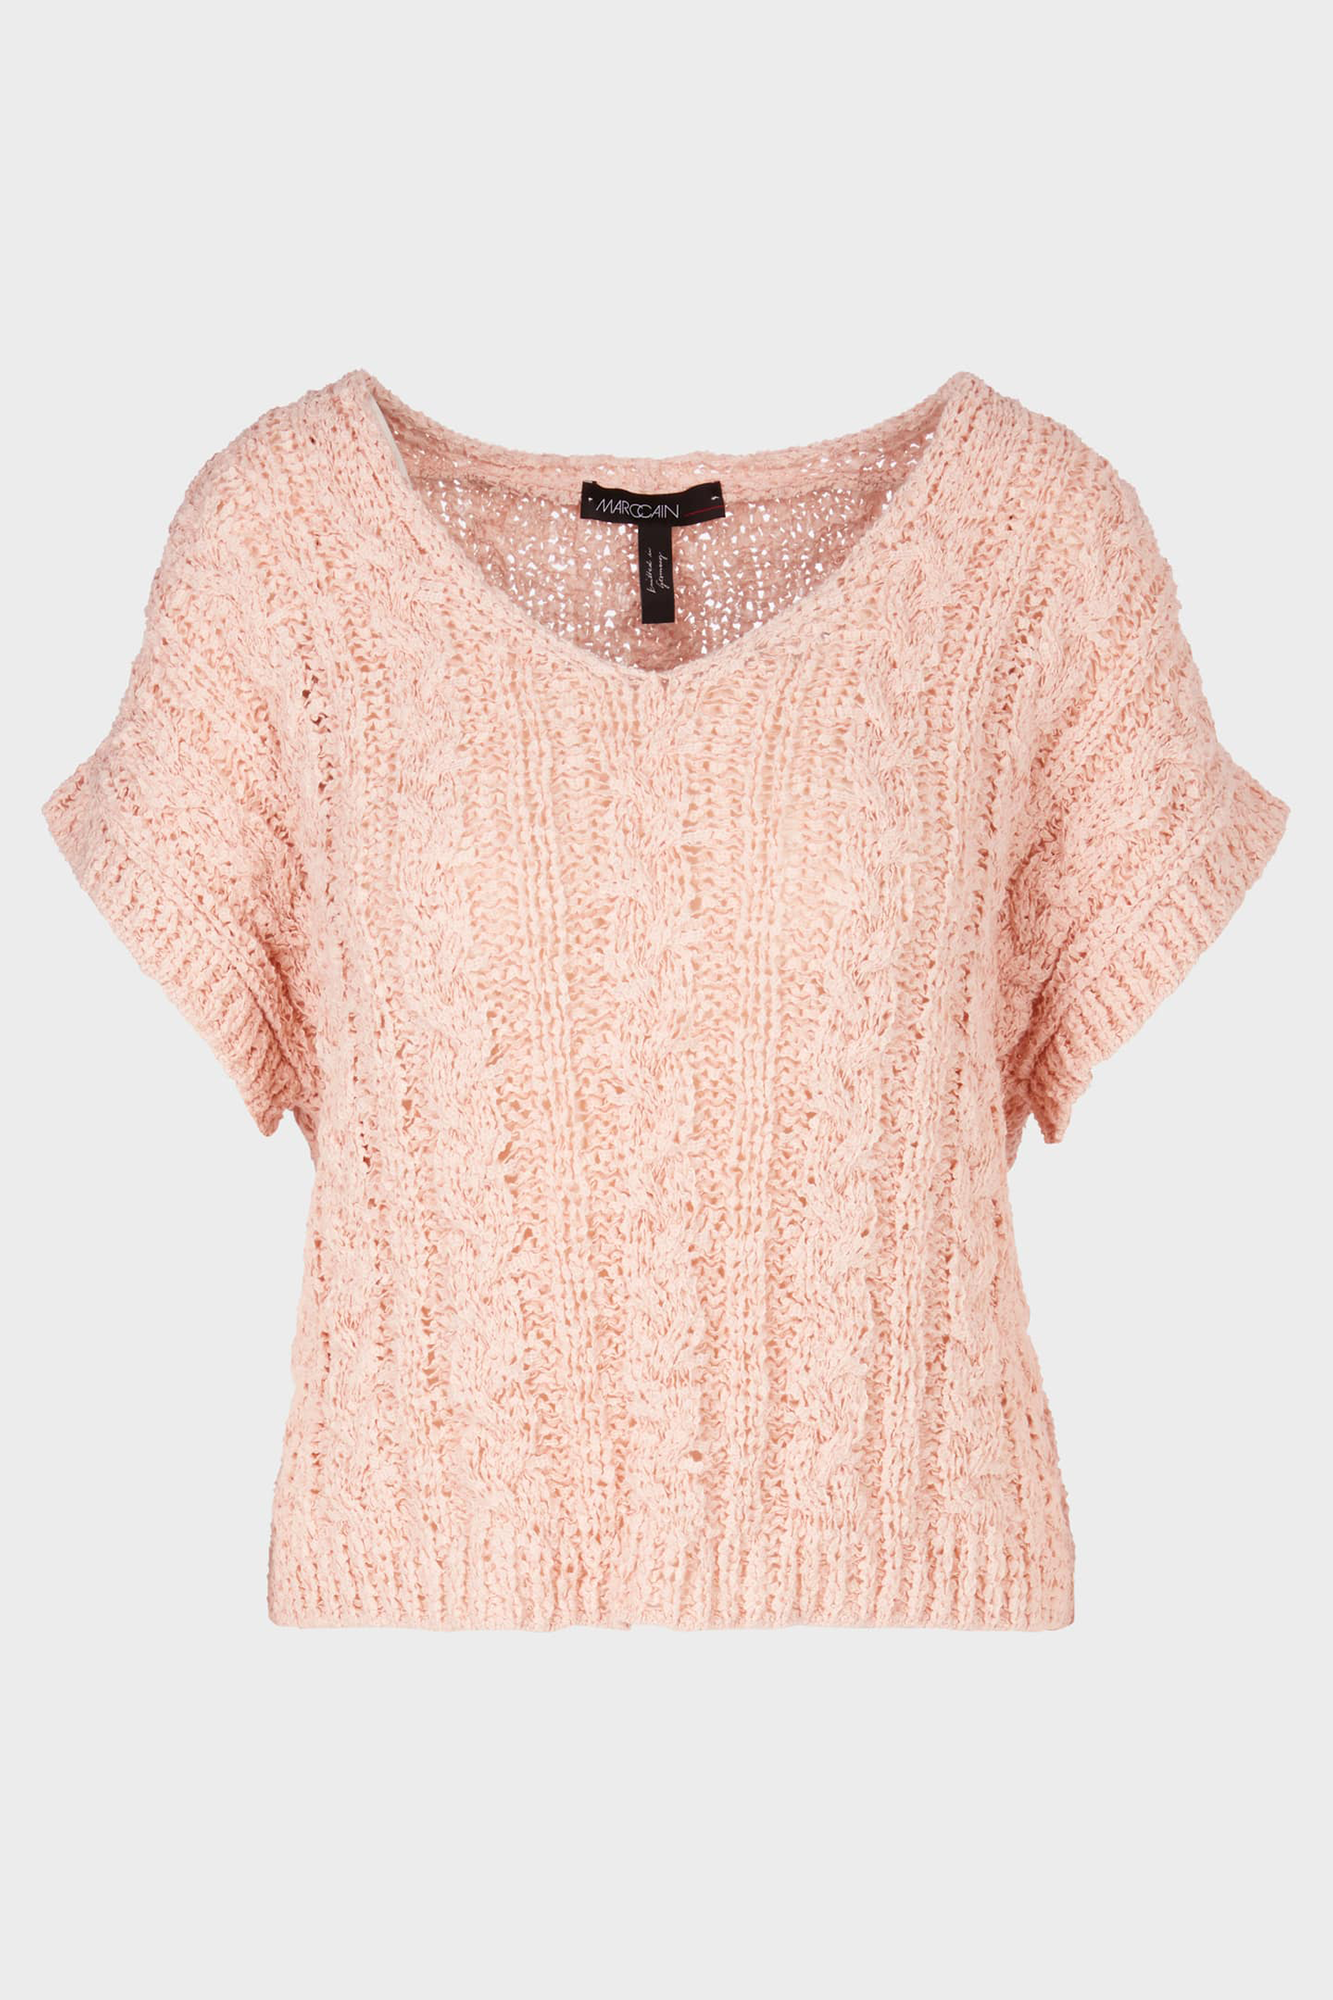 Ourika Gardens Tank Top in Knit Rethink Together Soft Rose